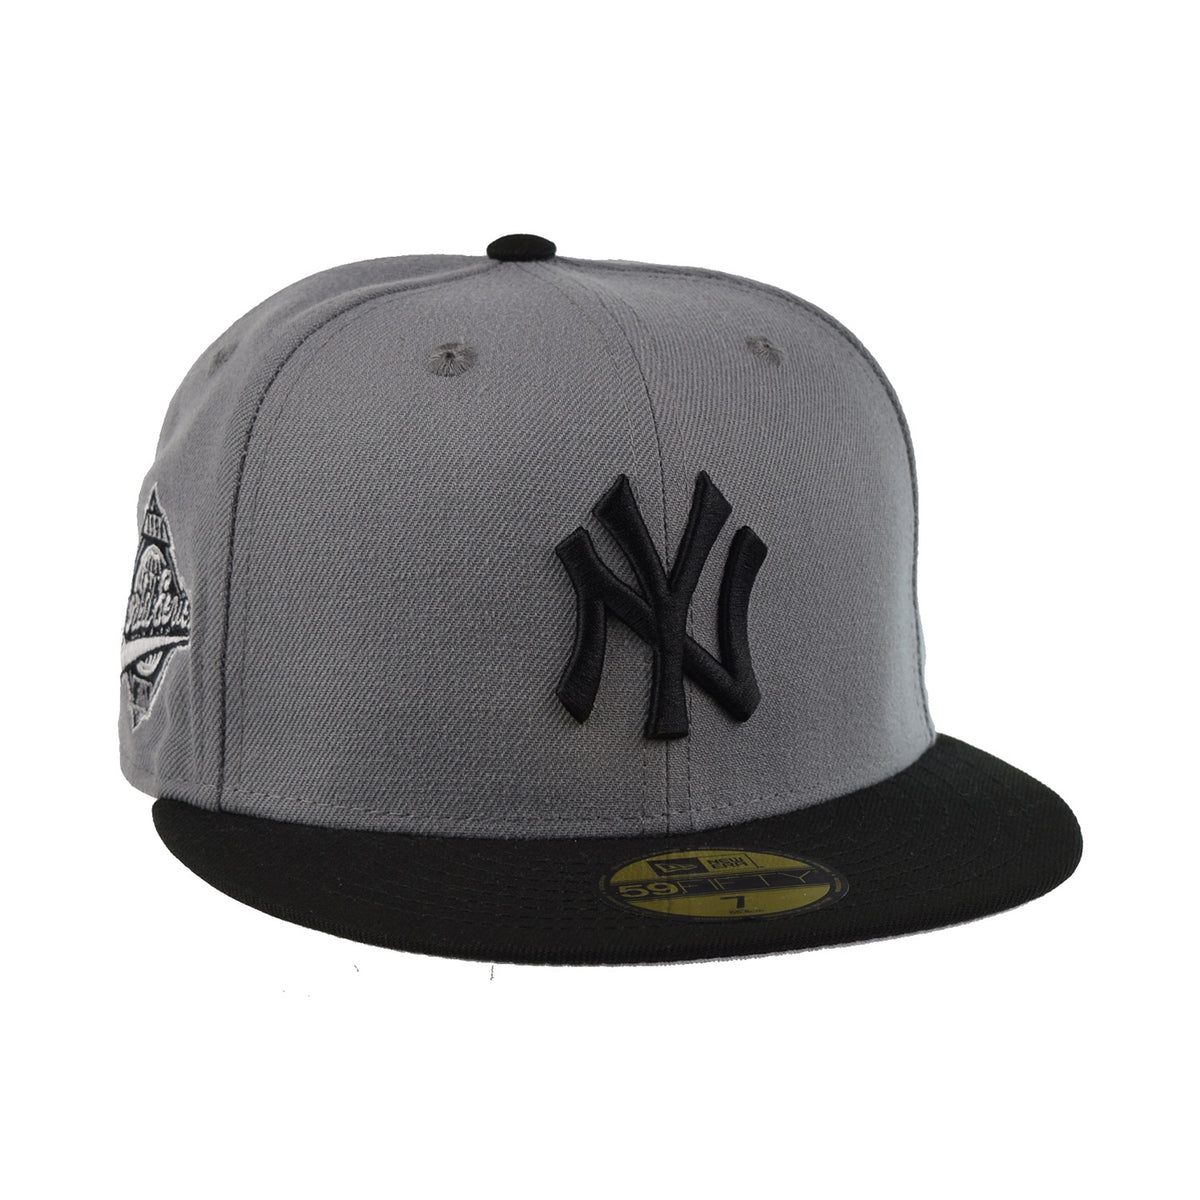 Men's New Era White/Navy New York Yankees 1996 World Series Two-Tone  59FIFTY Fitted Hat